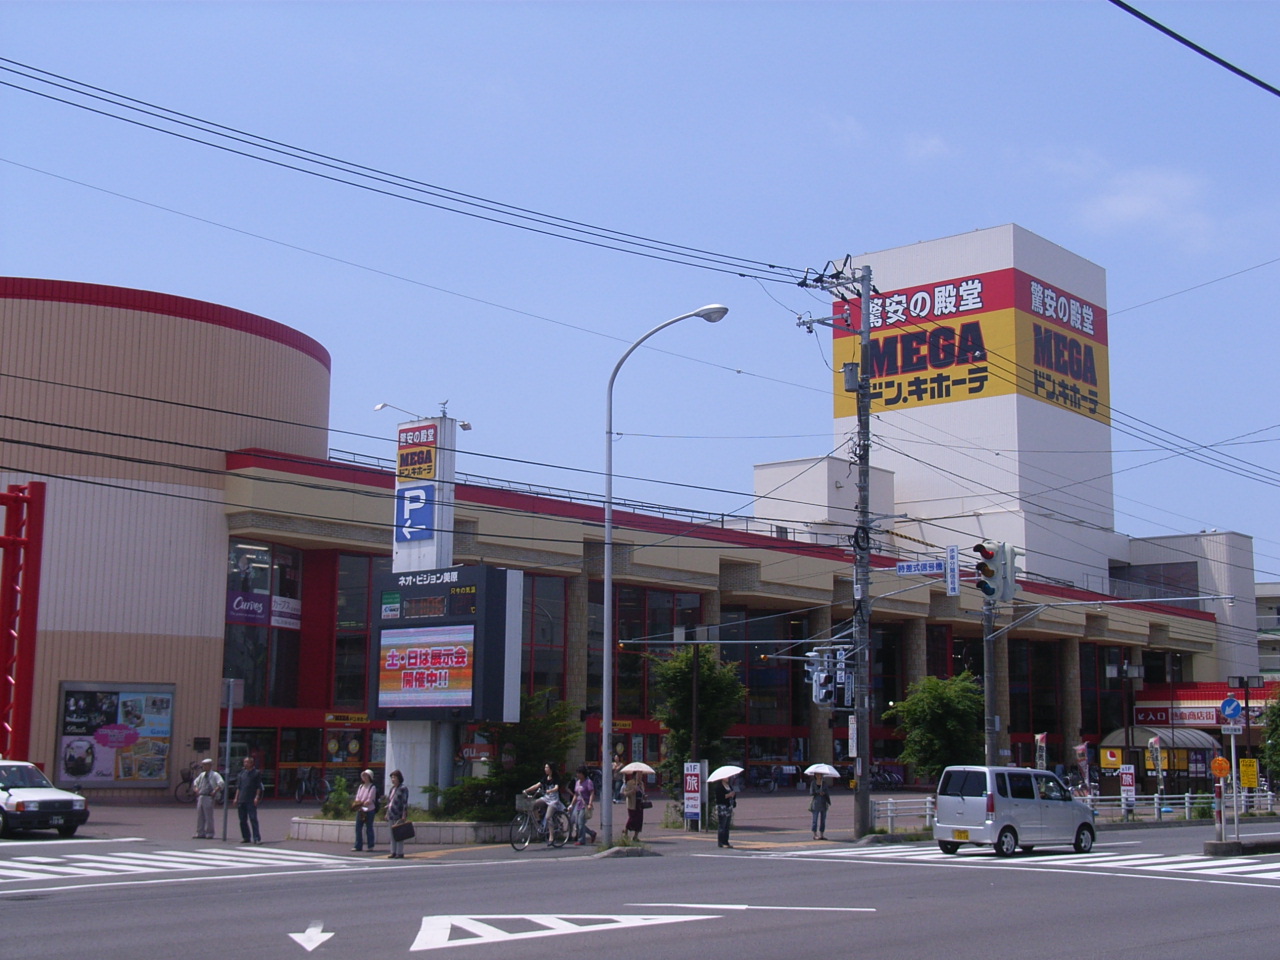 Shopping centre. MEGA Don ・ 1095m until Quijote Hakodate store (shopping center)